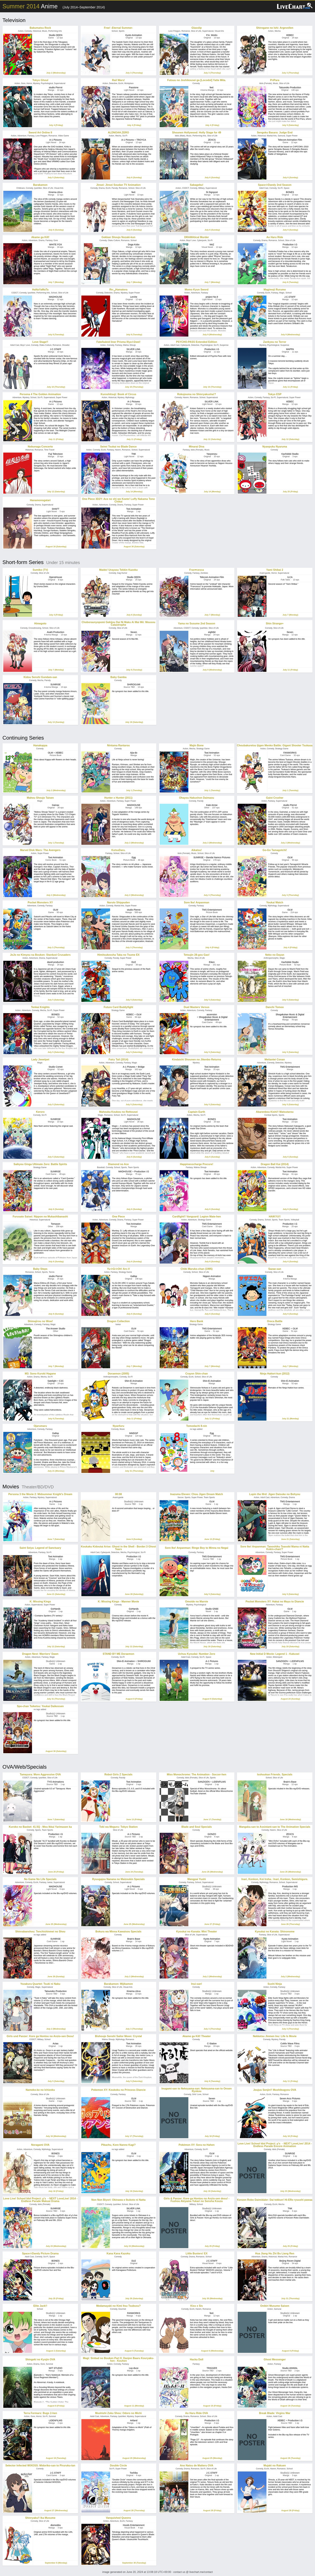 Anime Of 2014 To Watch